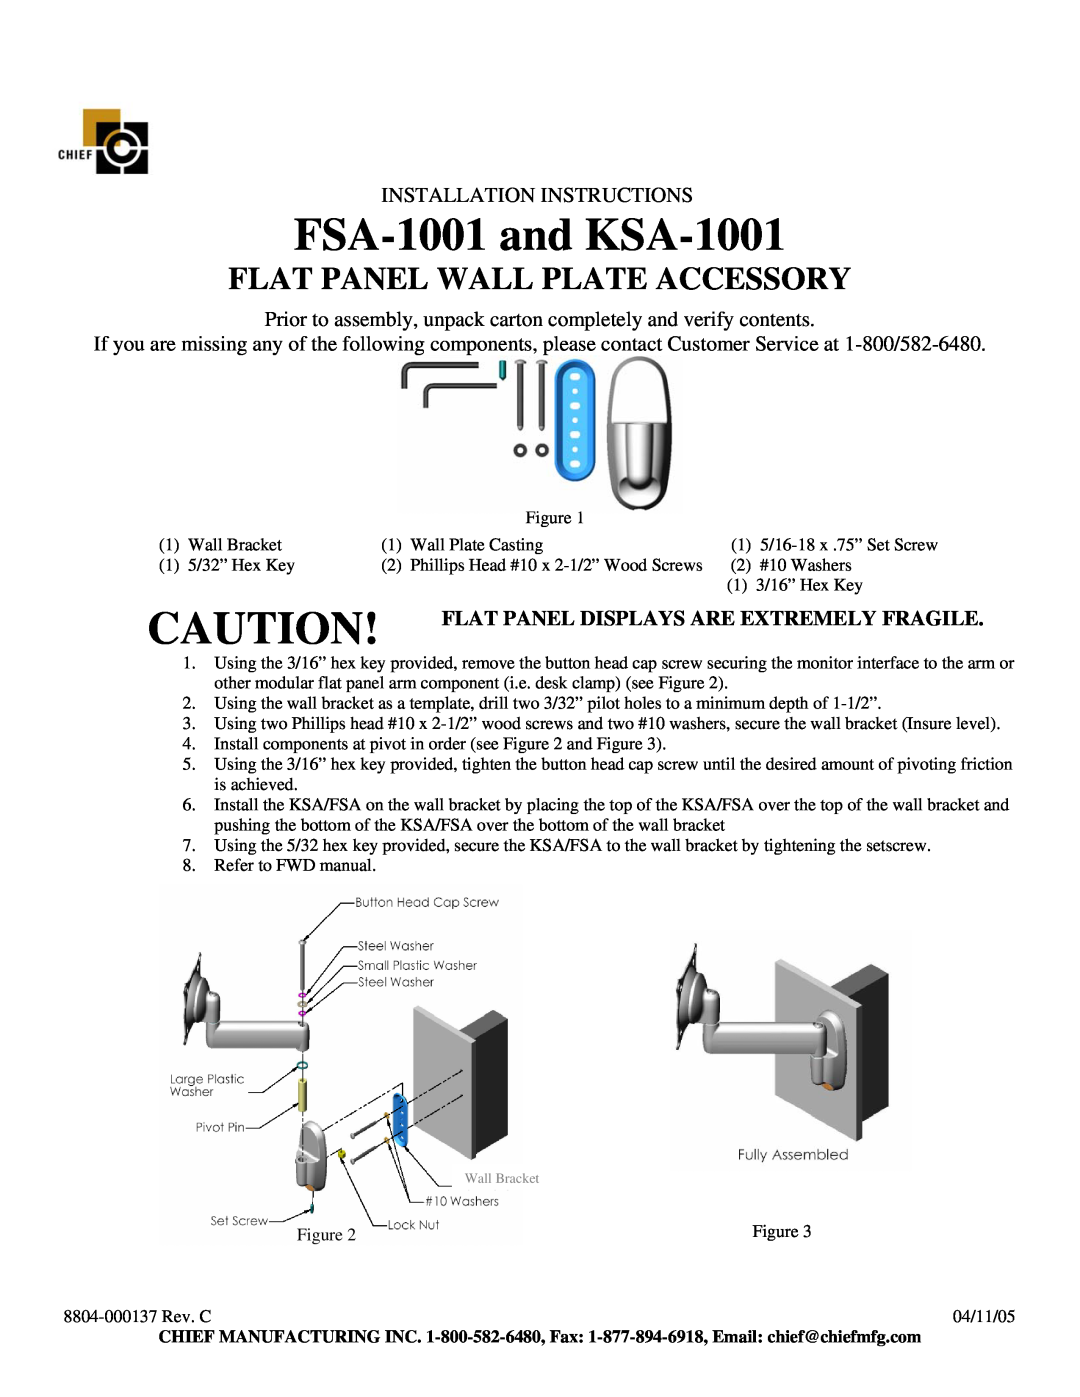 Chief Manufacturing installation instructions FSA-1001and KSA-1001, Flat Panel Wall Plate Accessory 